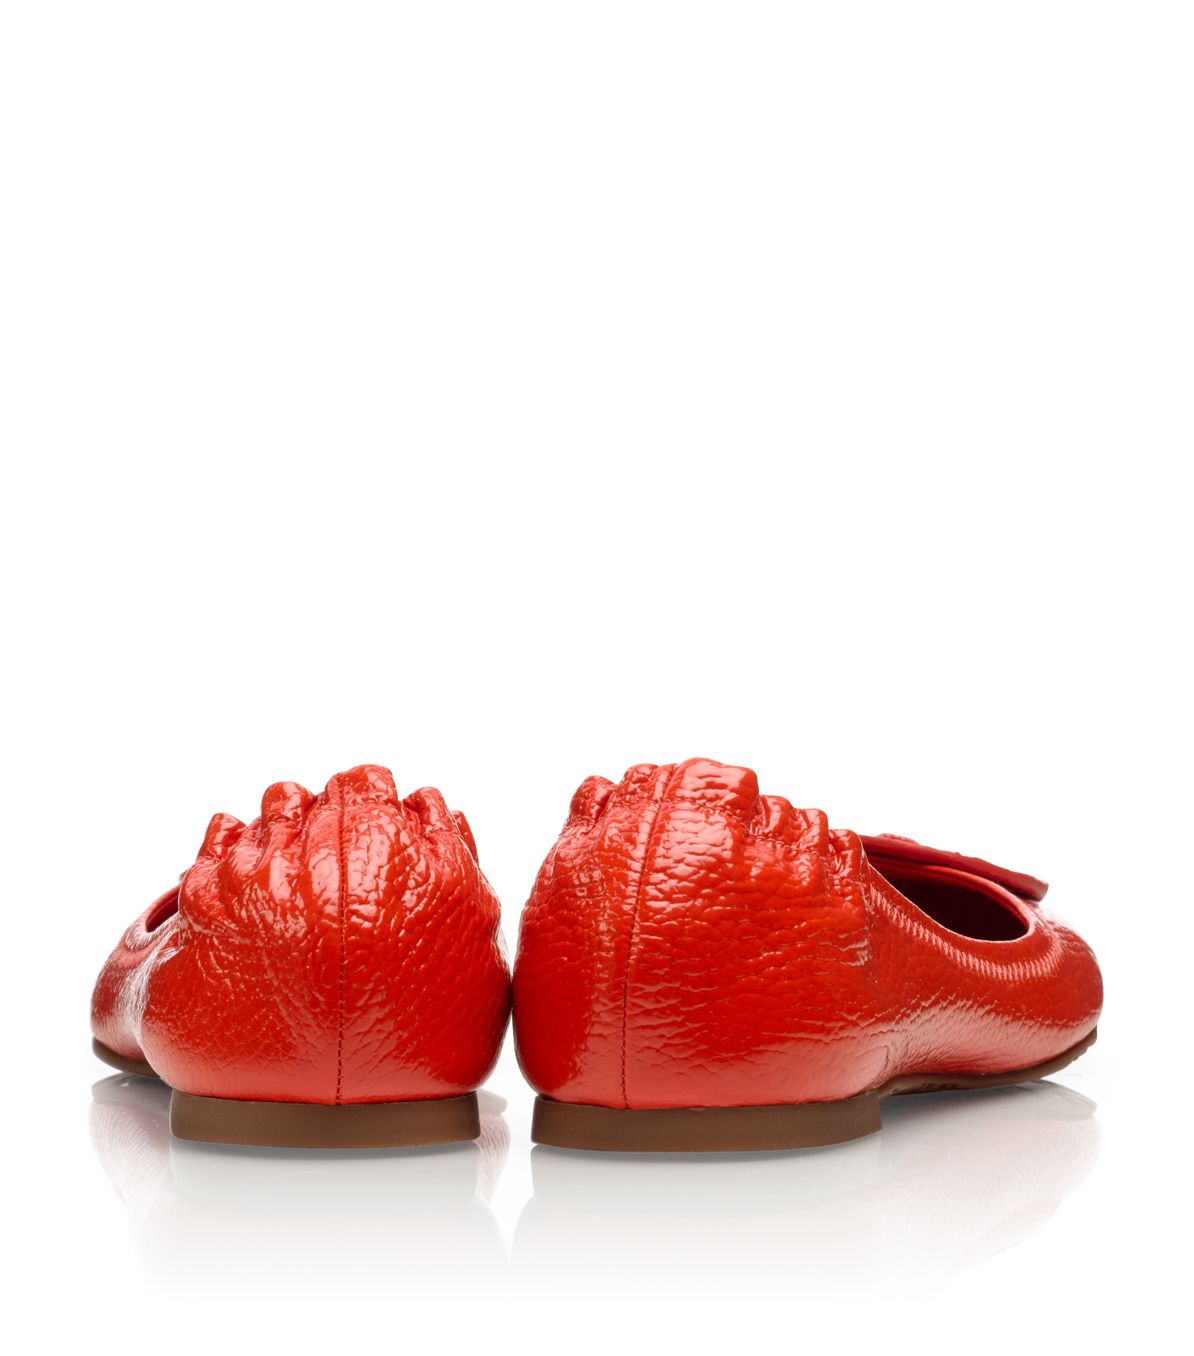 Lyst - Tory Burch Tumbled Leather Reva Ballet Flat in Red